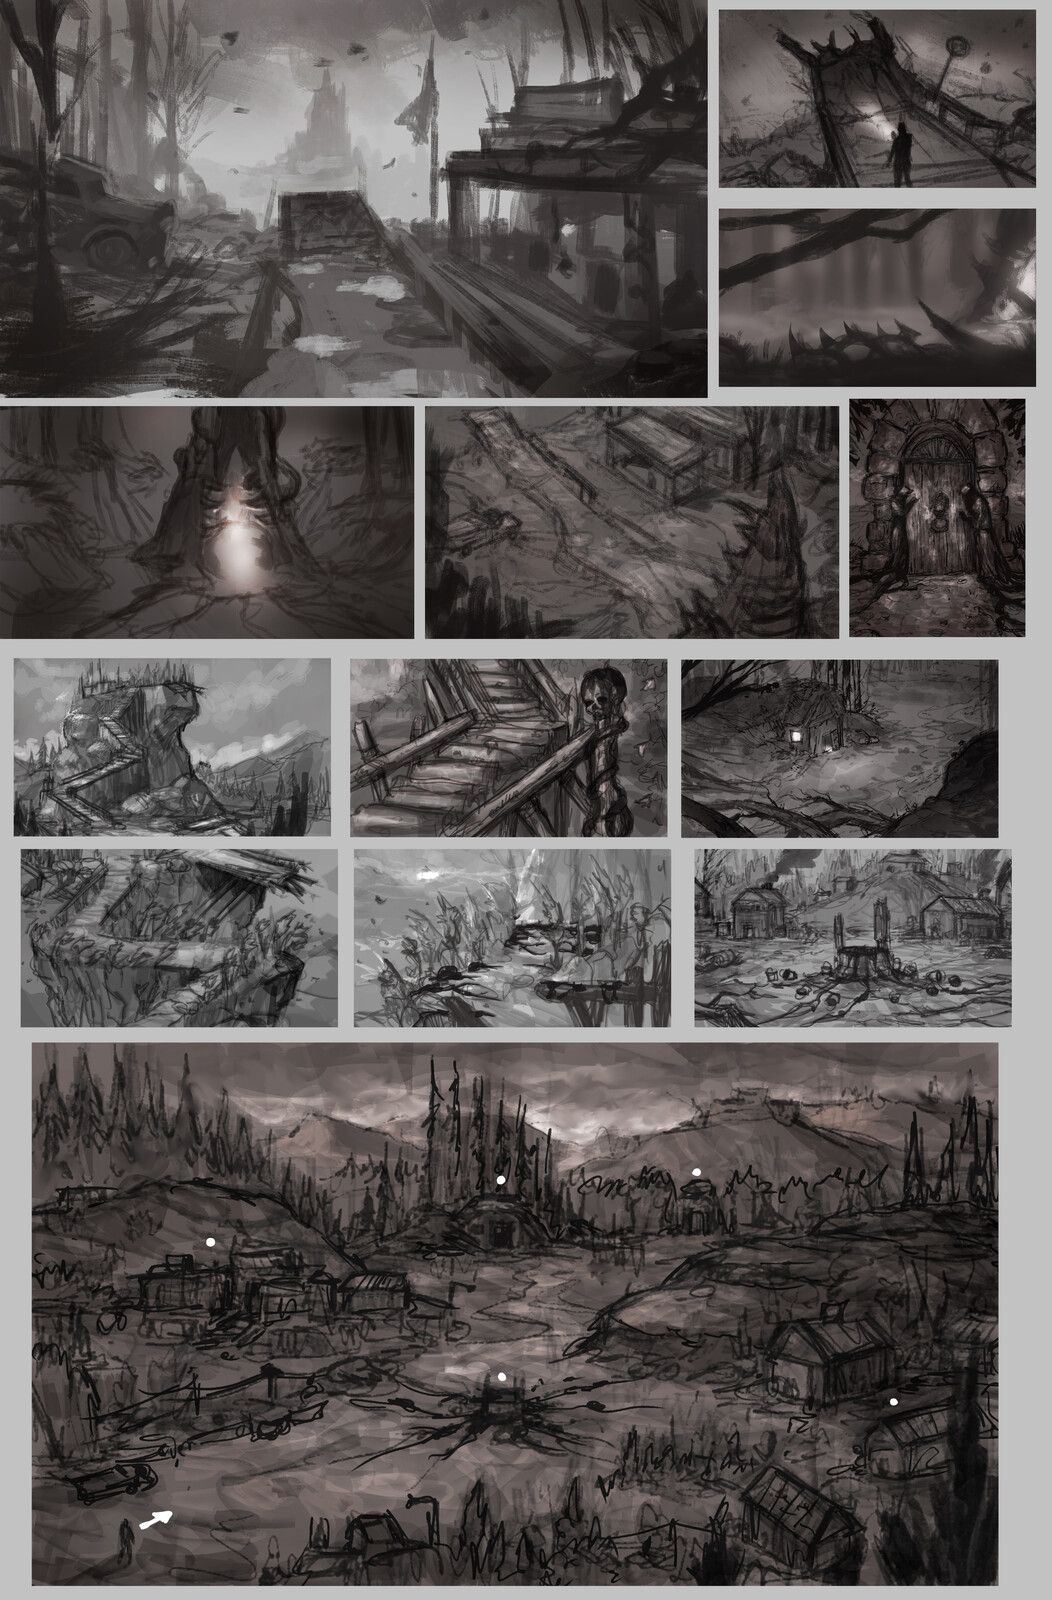 "SARKA" Work in progress game project-Unreal 4| Concept sketches